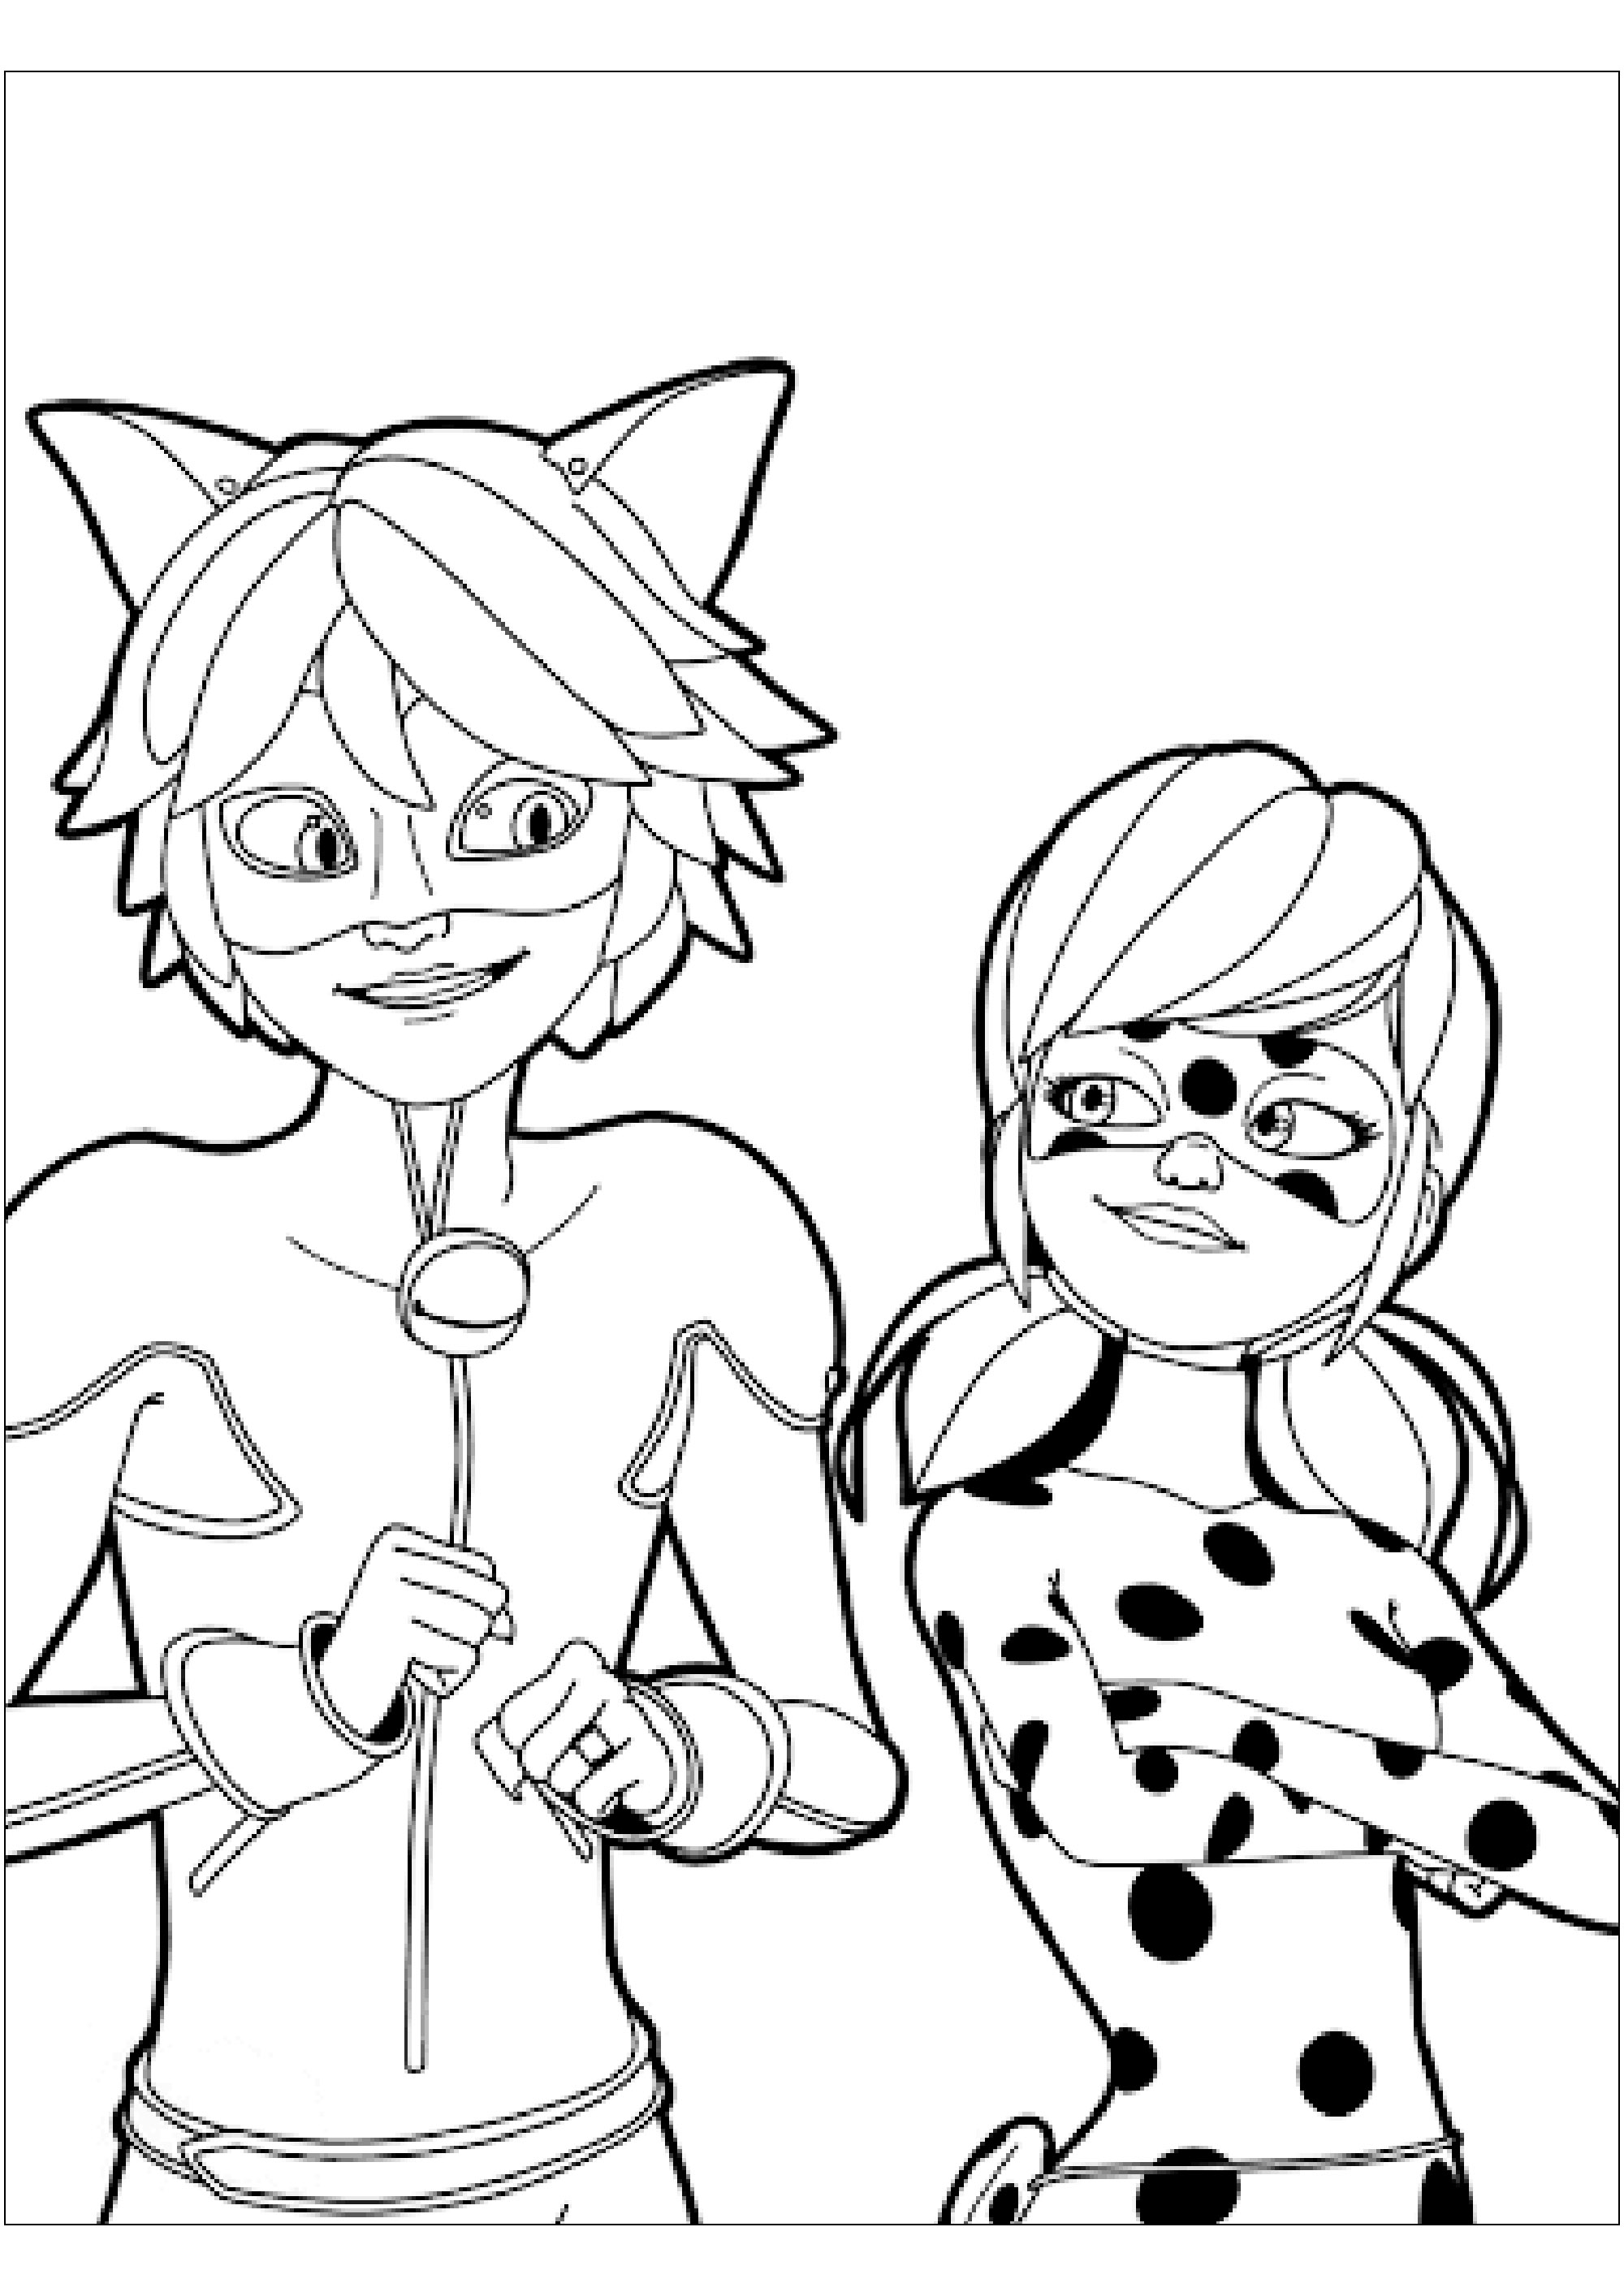 Miraculous lady bug free to color for children - Miraculous / LadyBug Kids Coloring  Pages